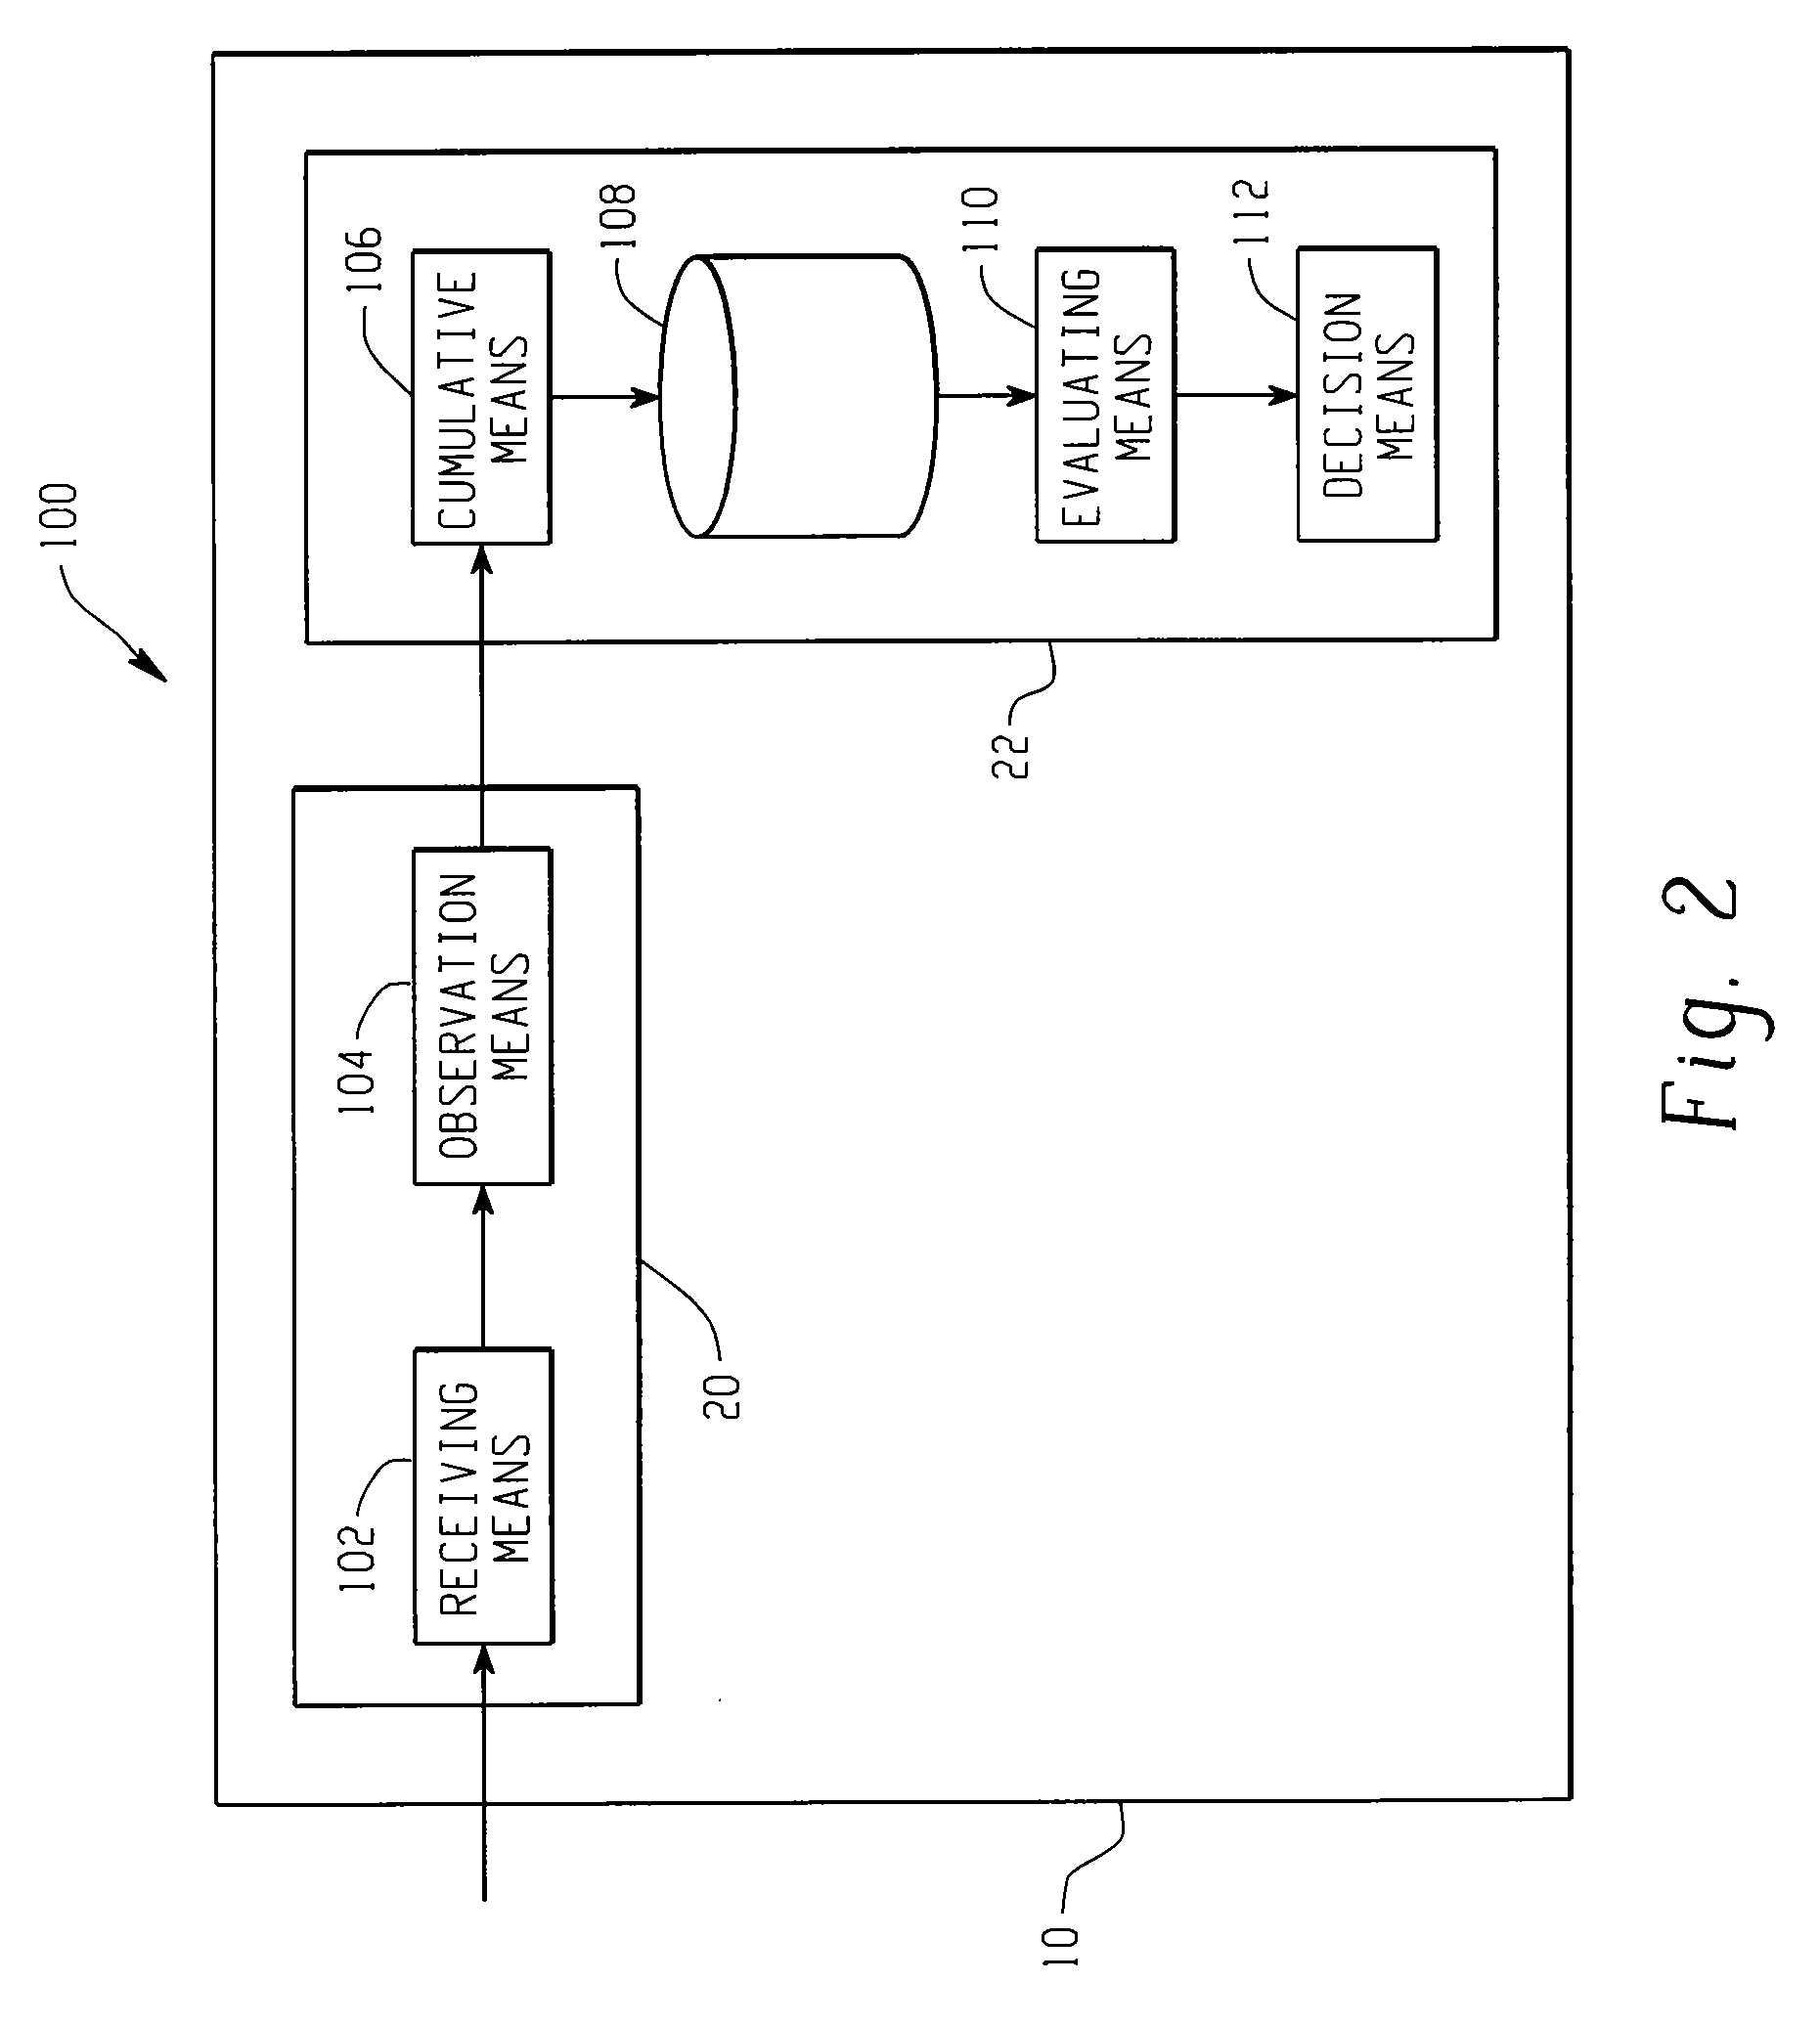 Multi-symbol noncoherent cpm detector having a trellis structure and a lock detector therefor